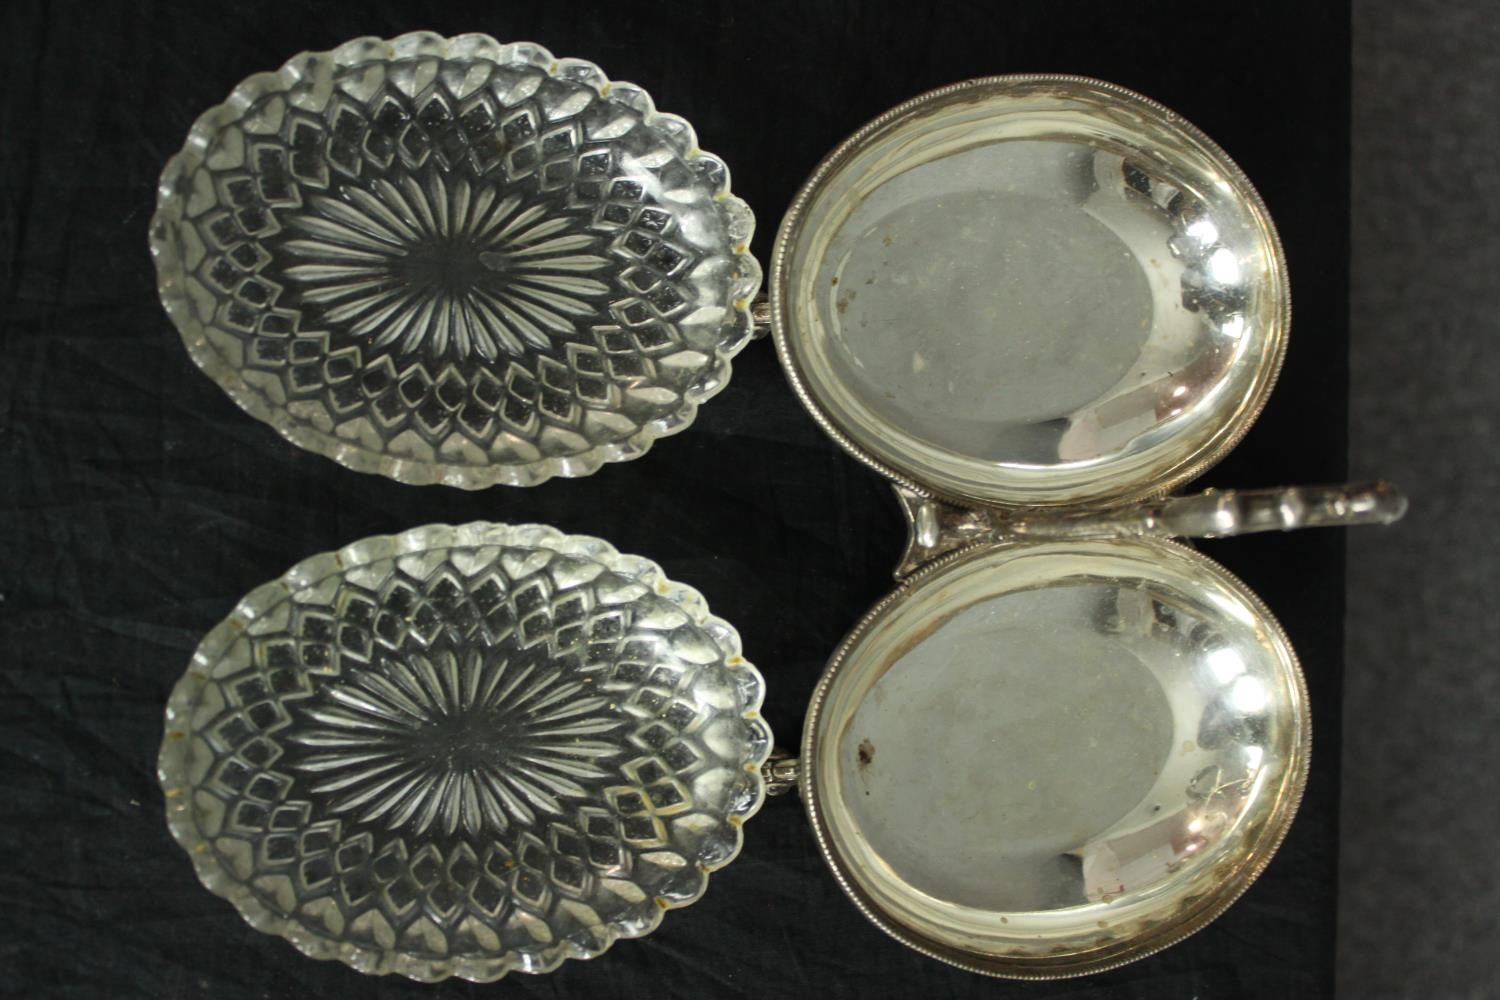 A pair of hallmarked silver bon bon dishes with pierced floral decoration along with a silver plated - Image 5 of 8